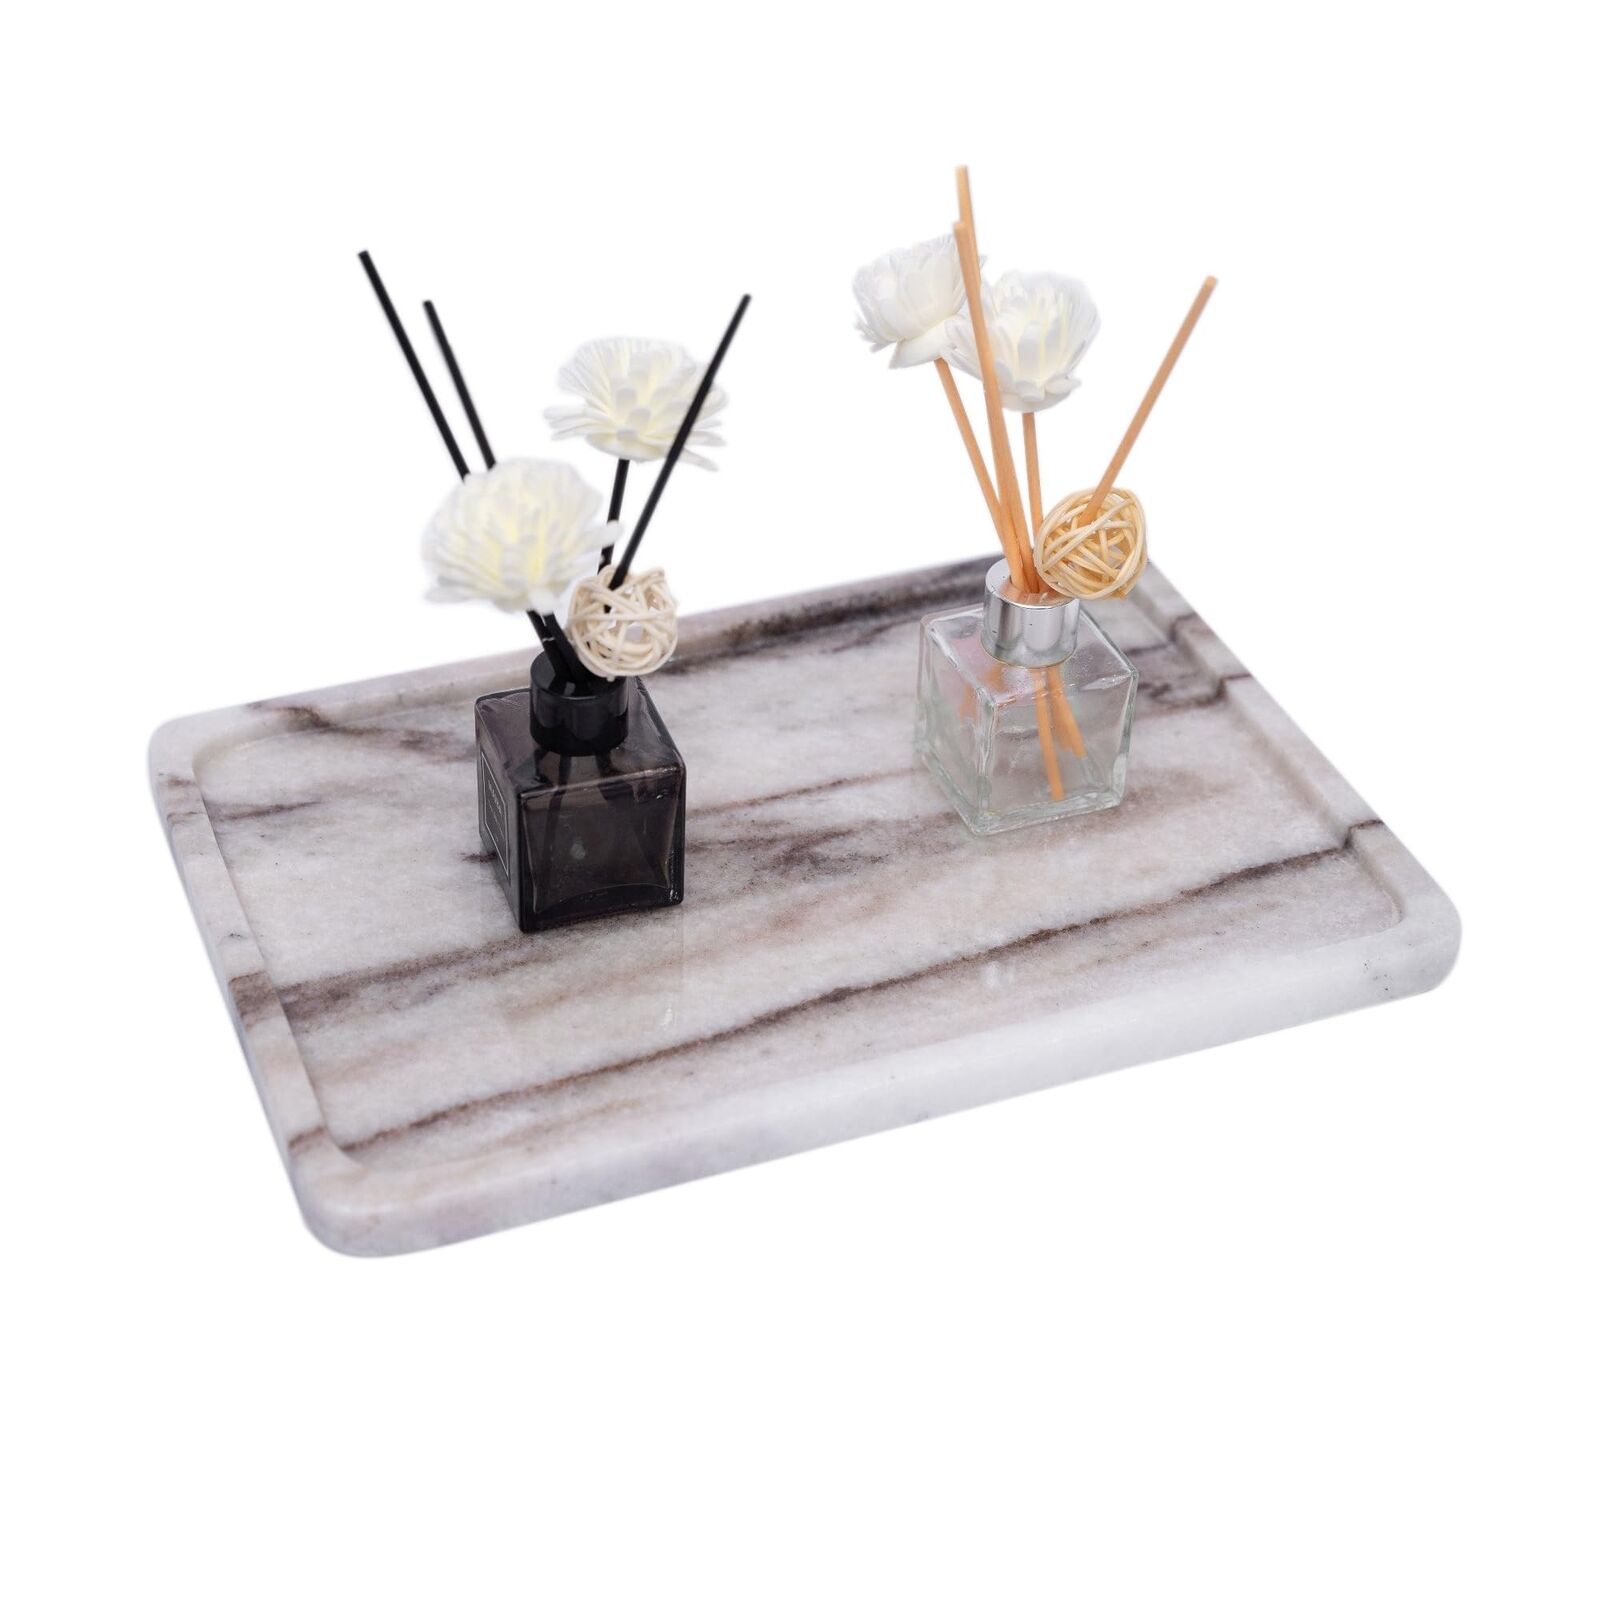 Luxurious Handmade Tray, Genuine Marble Tray, 12x8x0.8 inch, 100% Natural Mar...